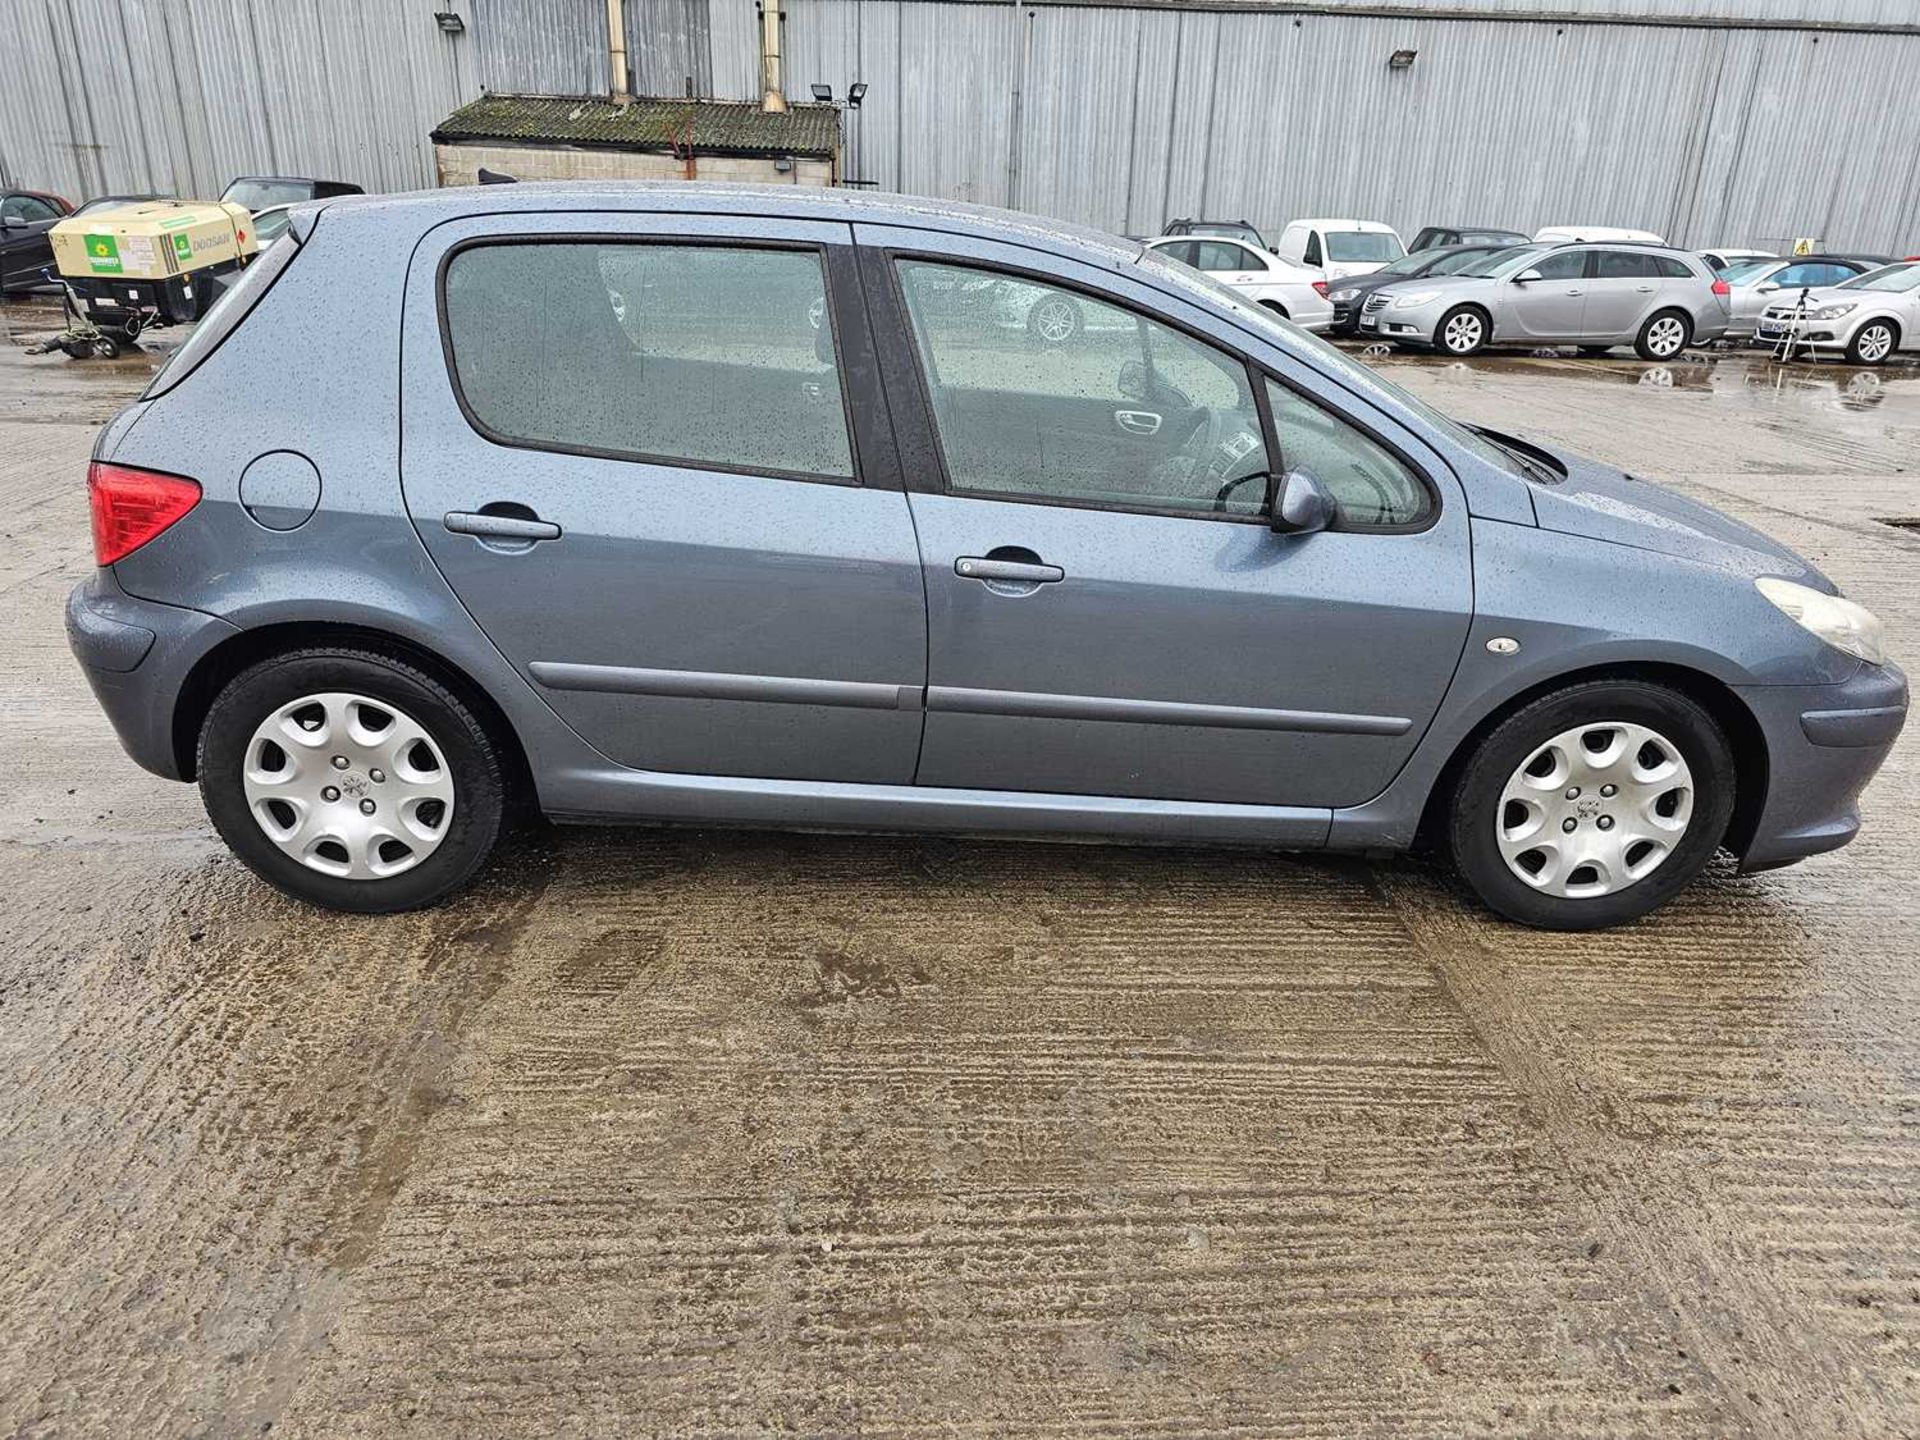 2007 Peugeot 307 X-line, 5 Speed, A/C (Reg. Docs. Available, Tested 11/24) - Image 7 of 28